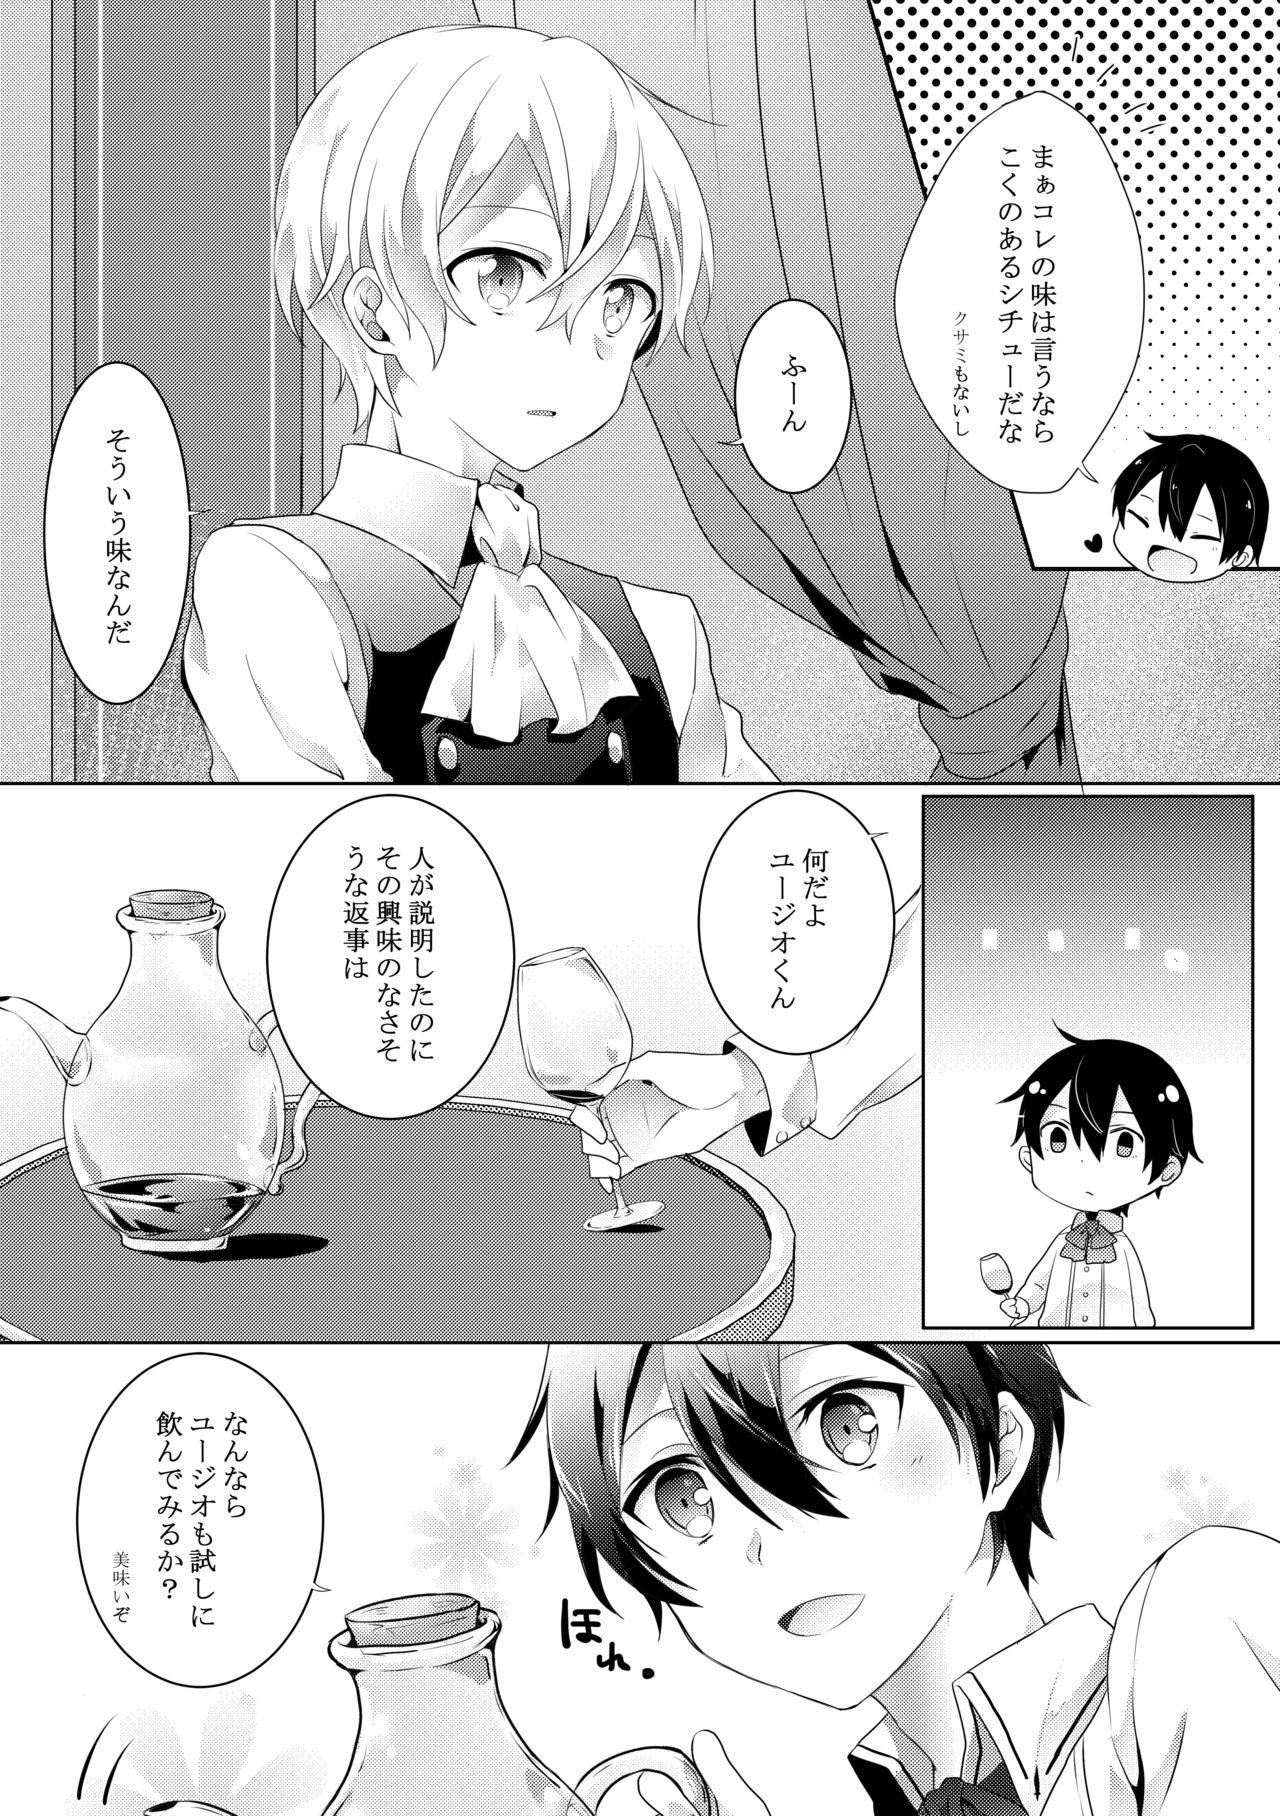 Best Blowjobs 君と僕のワルツ - Sword art online Fitness - Page 5